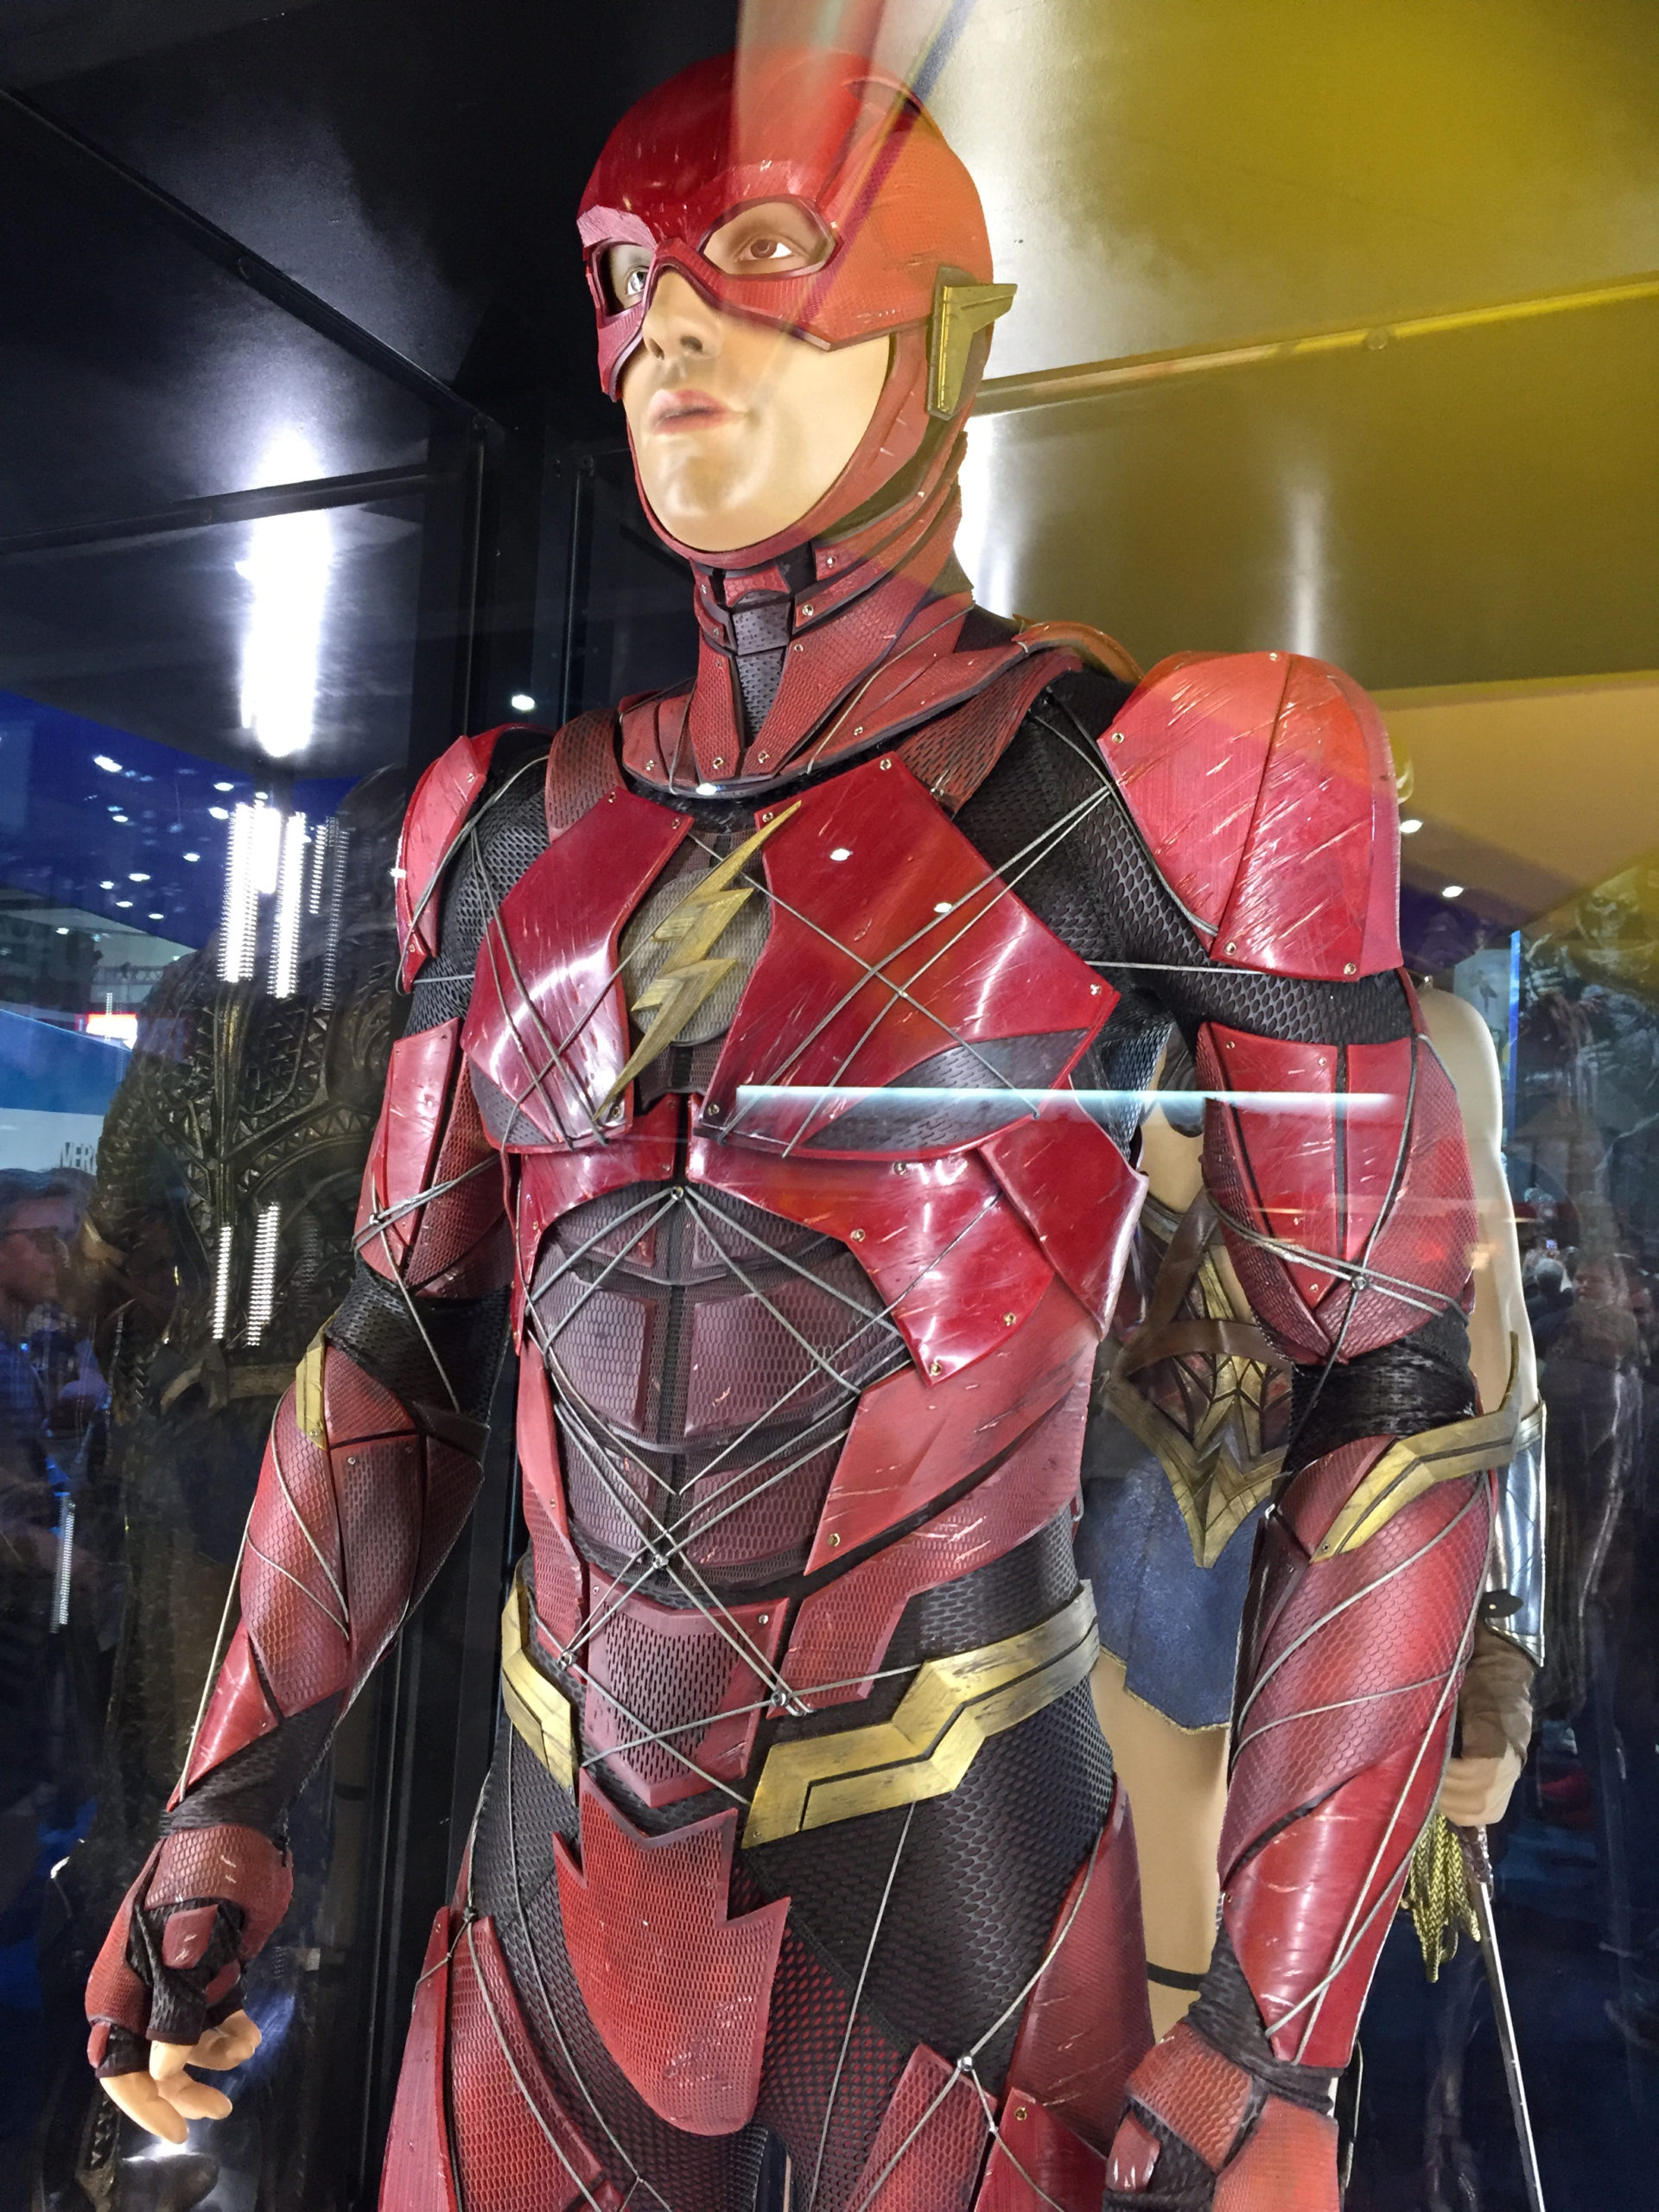 Up Close And Personal With The Justice League’s Movie Outfits